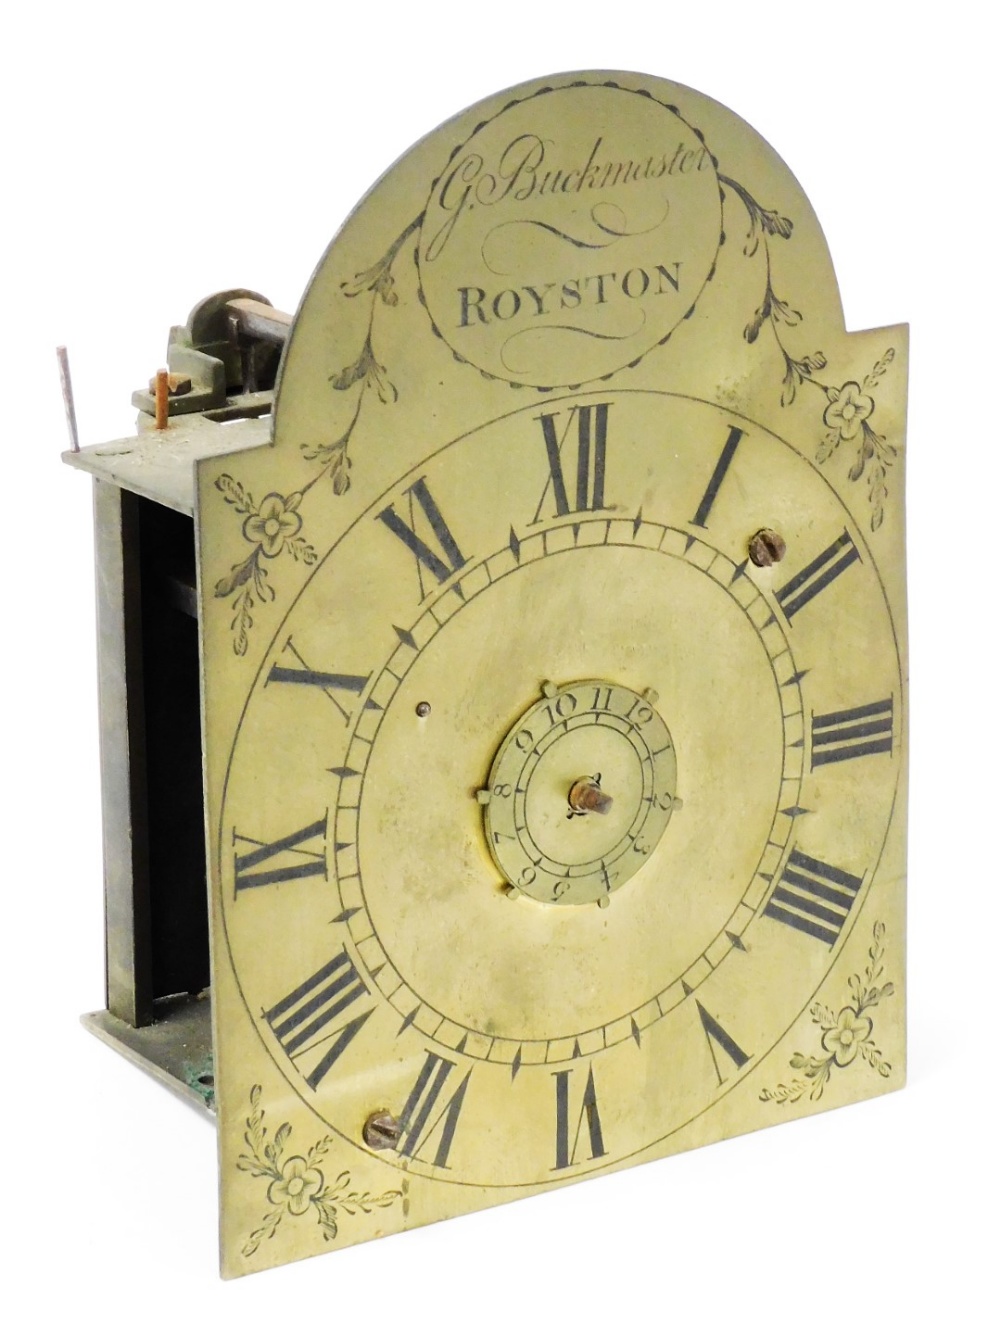 G Buckmister, Royston. An 18thC lantern clock, the brass plate front with Roman Numerals and central